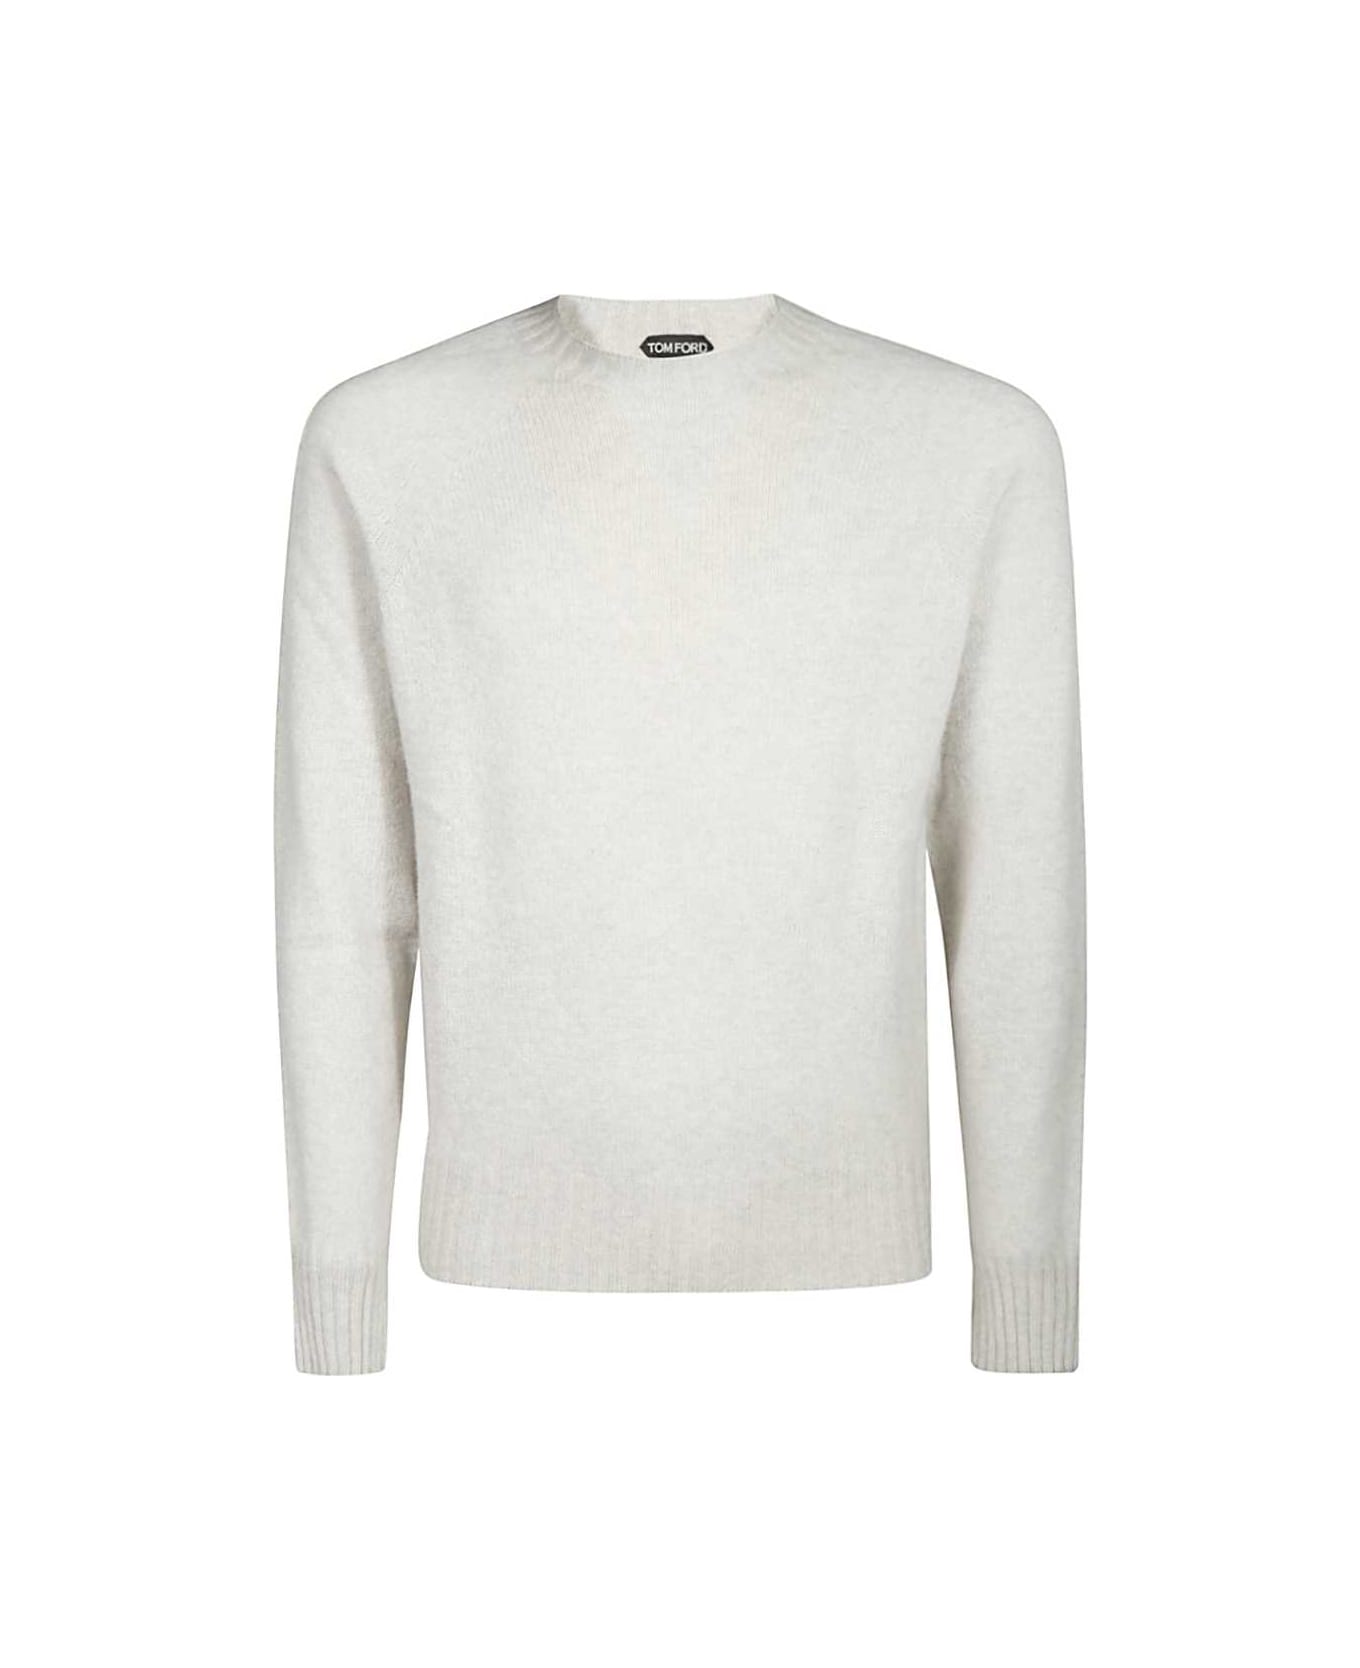 Tom Ford Cashmere Crew-neck Sweater - grey